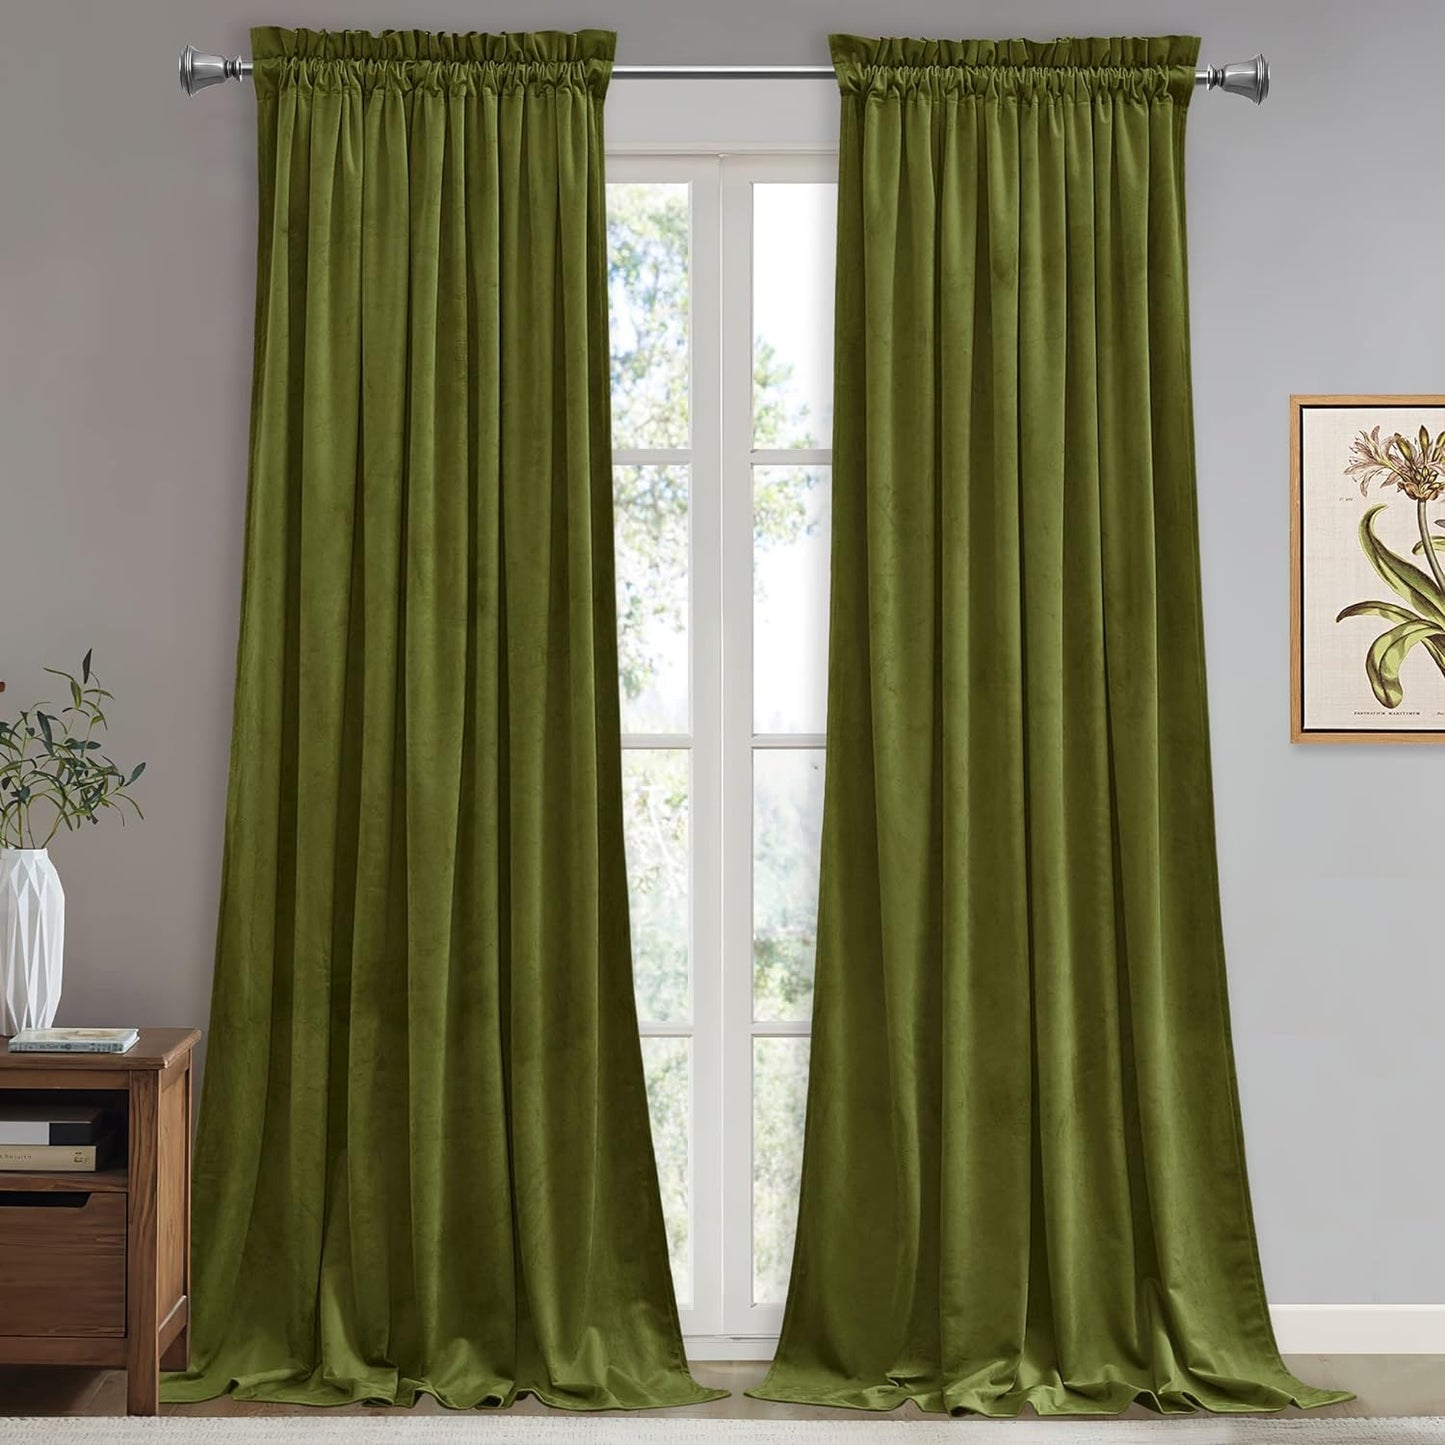 Stangh Theater Red Velvet Curtains - Super Soft Velvet Blackout Insulated Curtain Panels 84 Inches Length for Living Room Holiday Decorative Drapes for Master Bedroom, W52 X L84, 2 Panels  StangH Olive Green W52" X L96" 